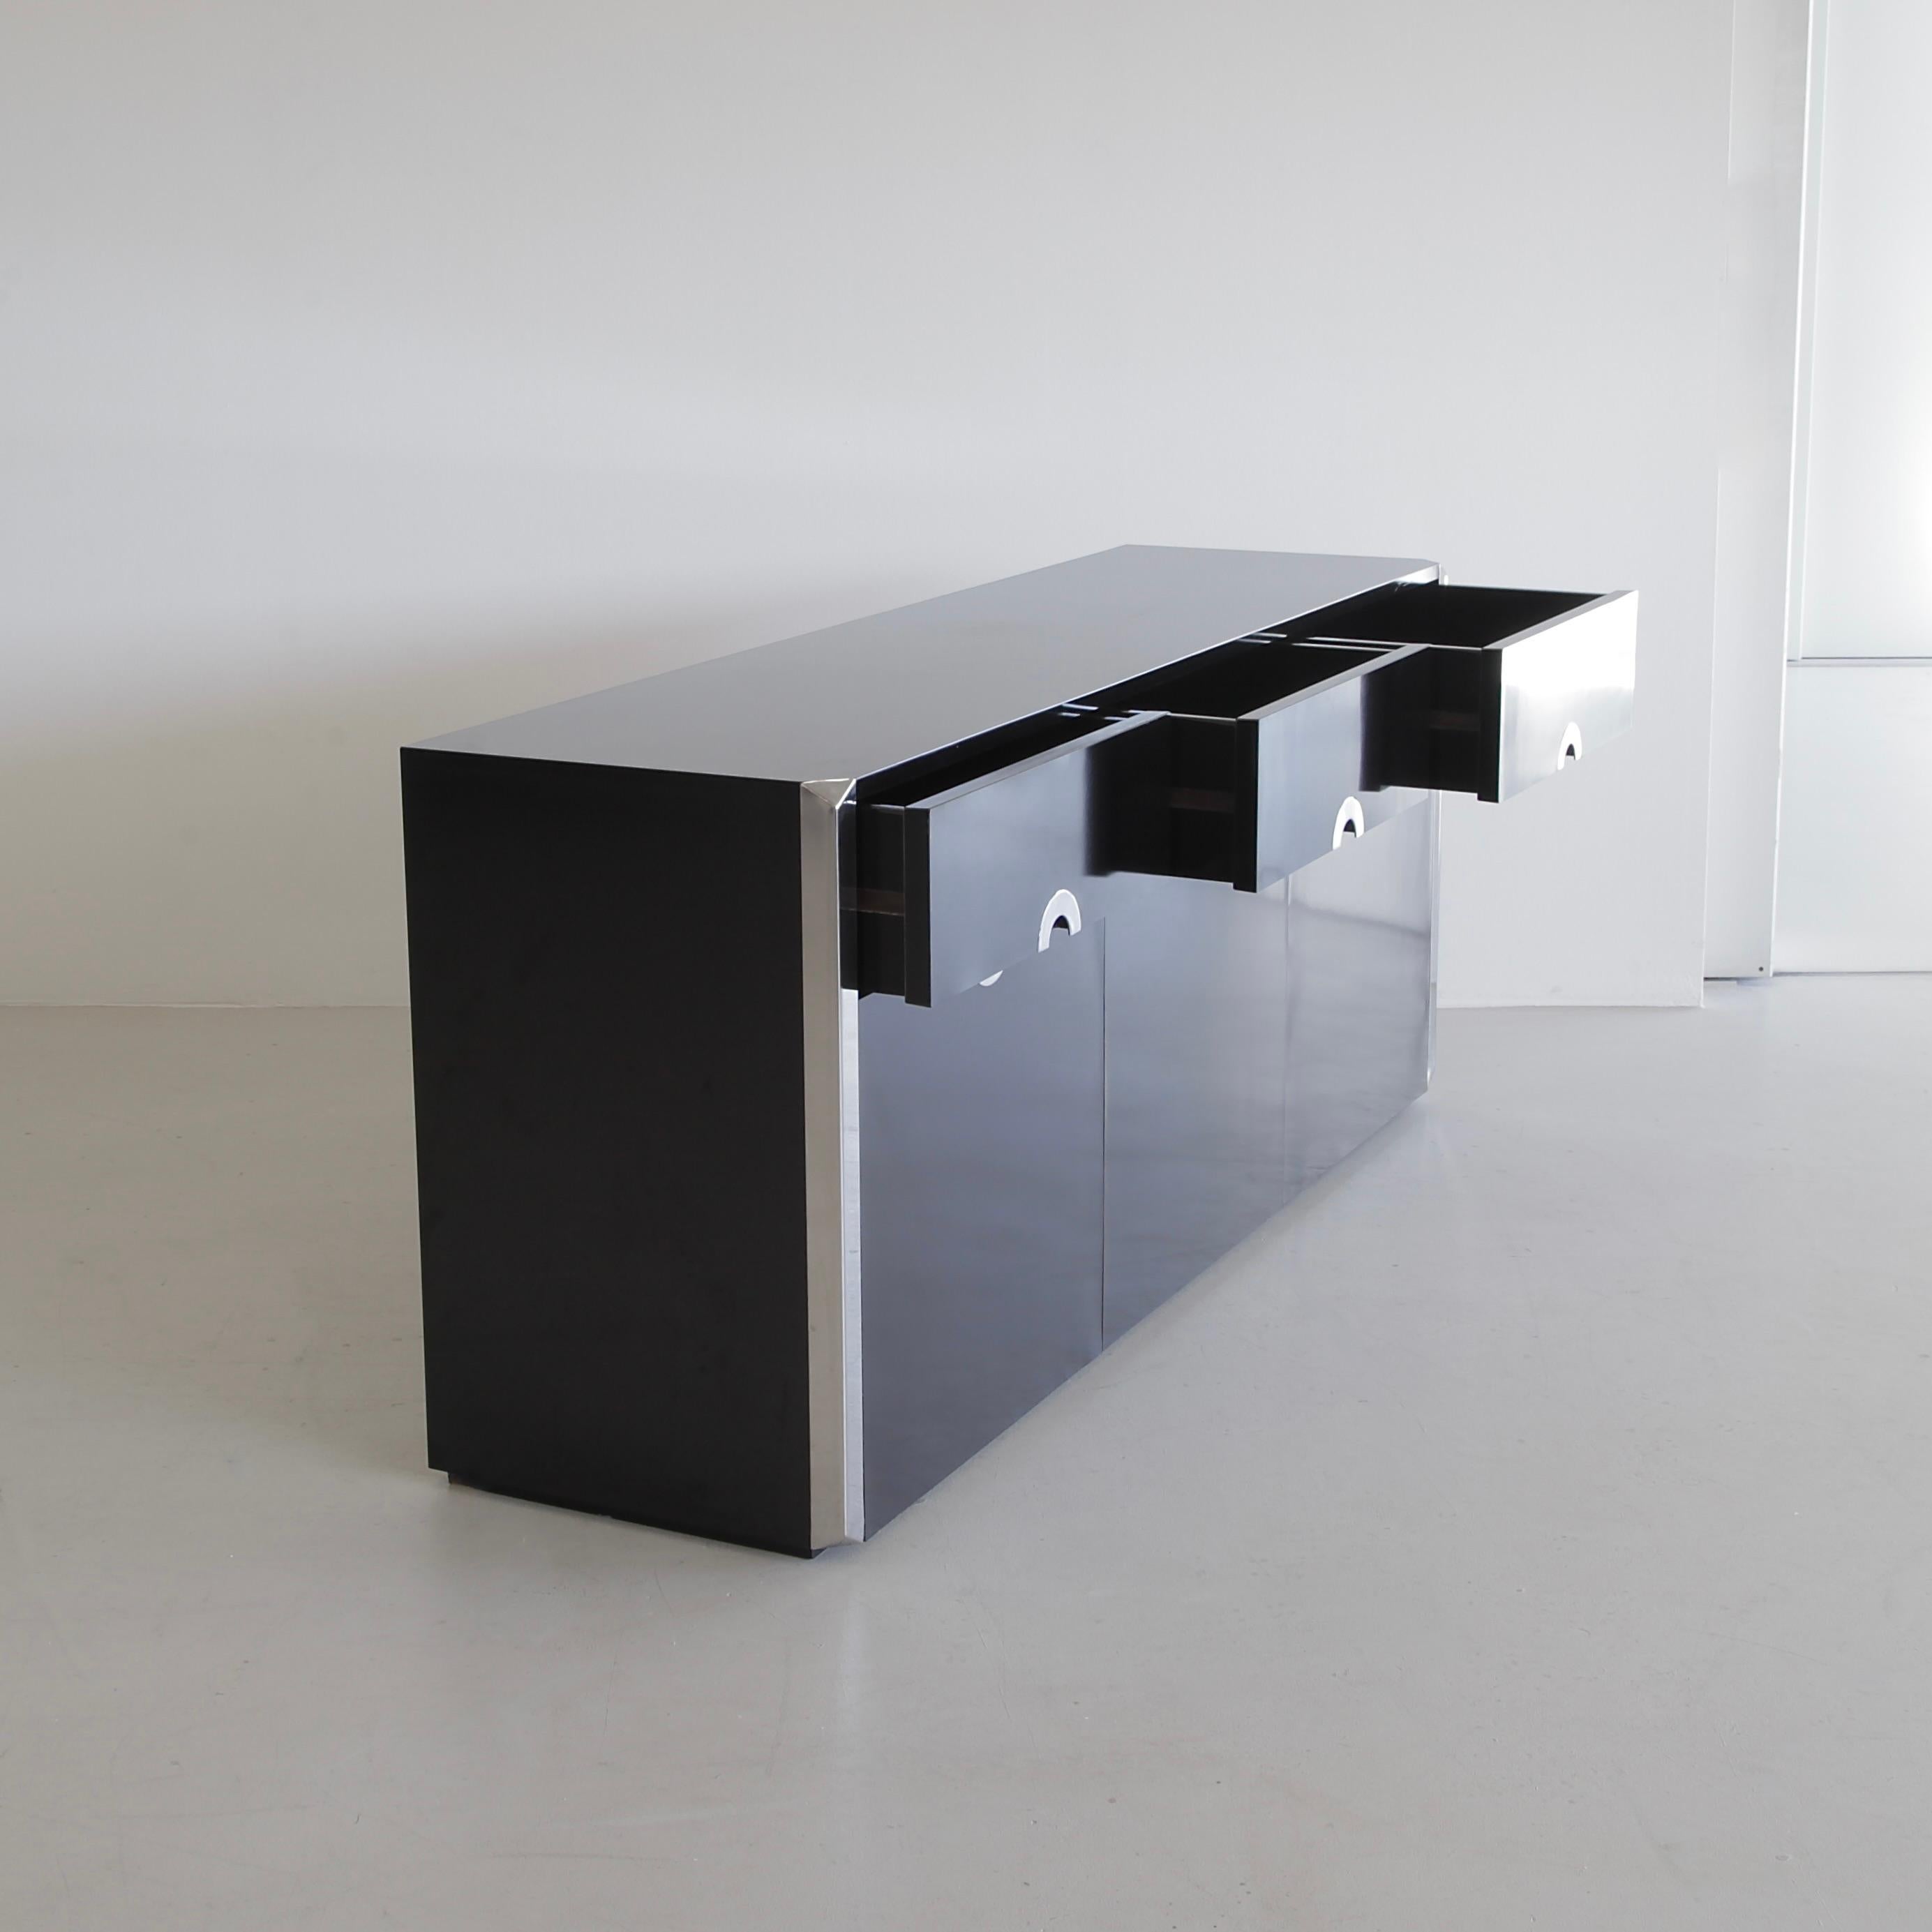 Black three-door Sideboard designed by Willy Rizzo. Italy, Mario Sabot, 1972. Black laminate and chrome detailed sideboard, designed by Willy Rizzo and produced by Mario Sabot.

Two doors, one centre drop-down door, and three drawers, each